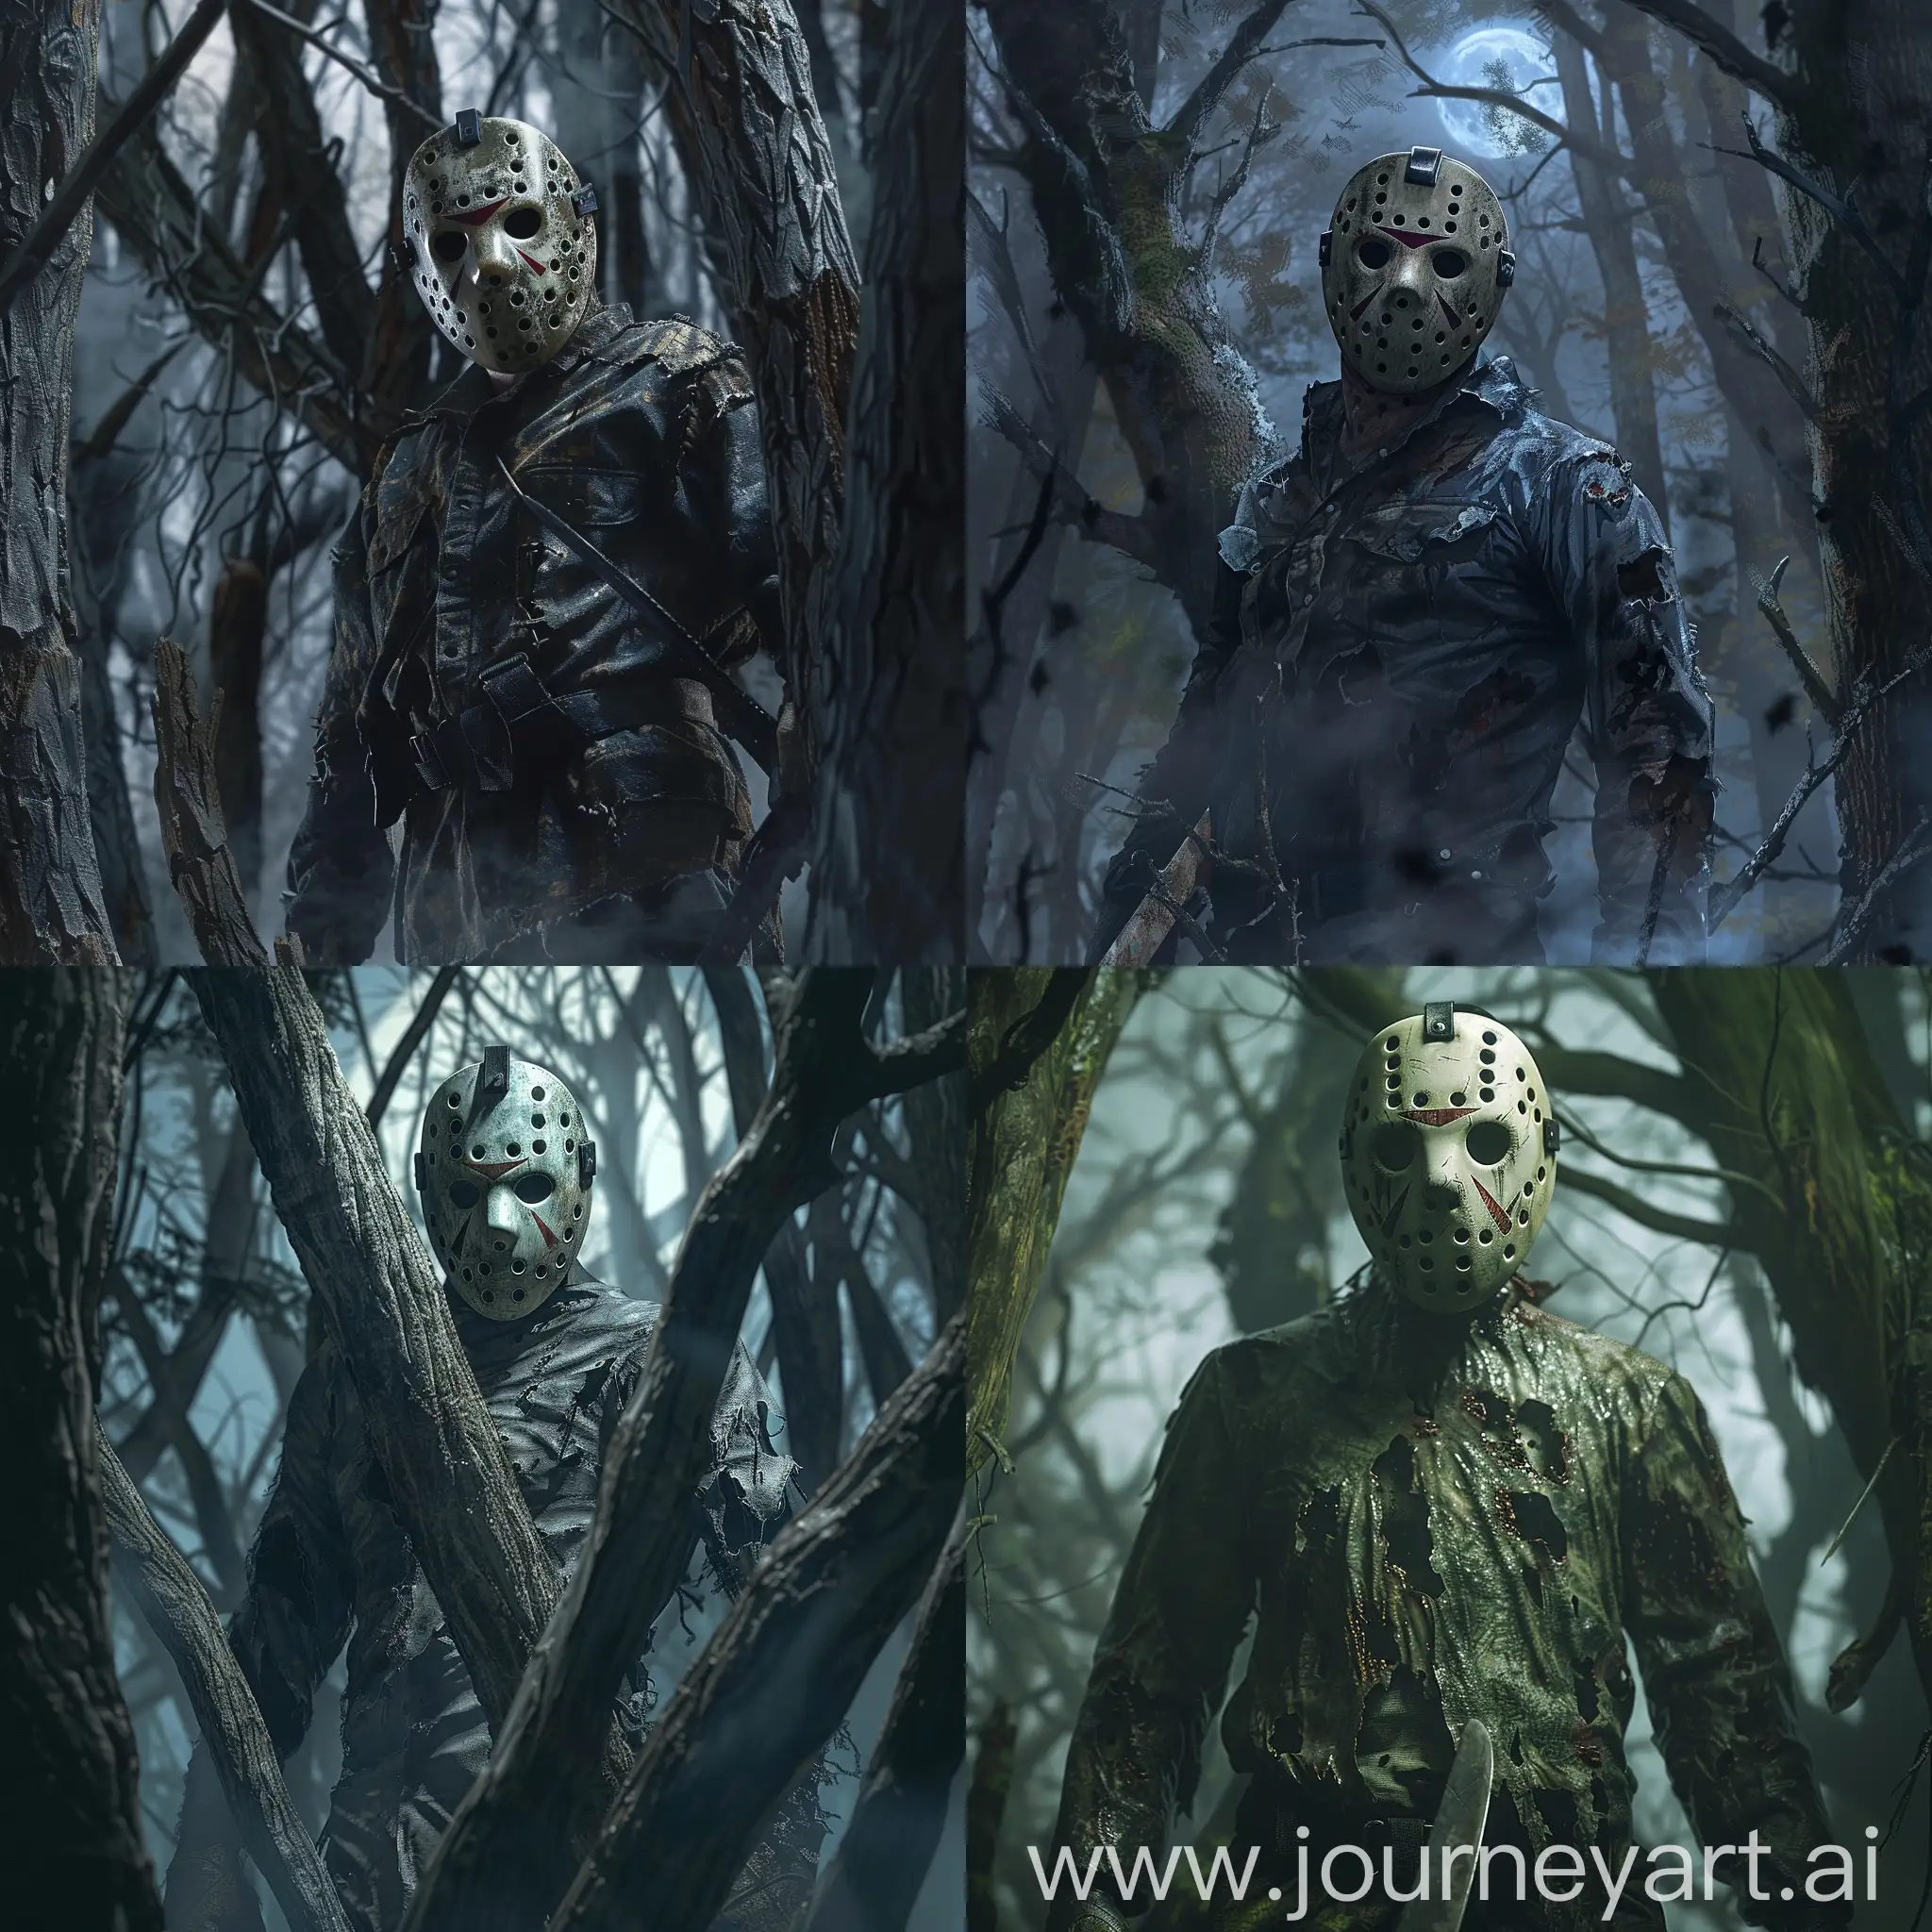 In the heart of a foreboding forest shrouded in mist, a close-up image reveals Jason Voorhees, the silent sentinel of the shadows. His towering figure stands amidst gnarled trees, his weathered attire blending seamlessly with the eerie surroundings. Jason's iconic hockey mask reflects the faint moonlight, its surface etched with scars and tales of past battles. Despite the darkness that envelops him, his piercing gaze pierces through the veil of night, emanating an aura of unyielding vigilance. With his signature machete clutched tightly in hand, he remains a solitary figure, a silent guardian of the haunted woods.